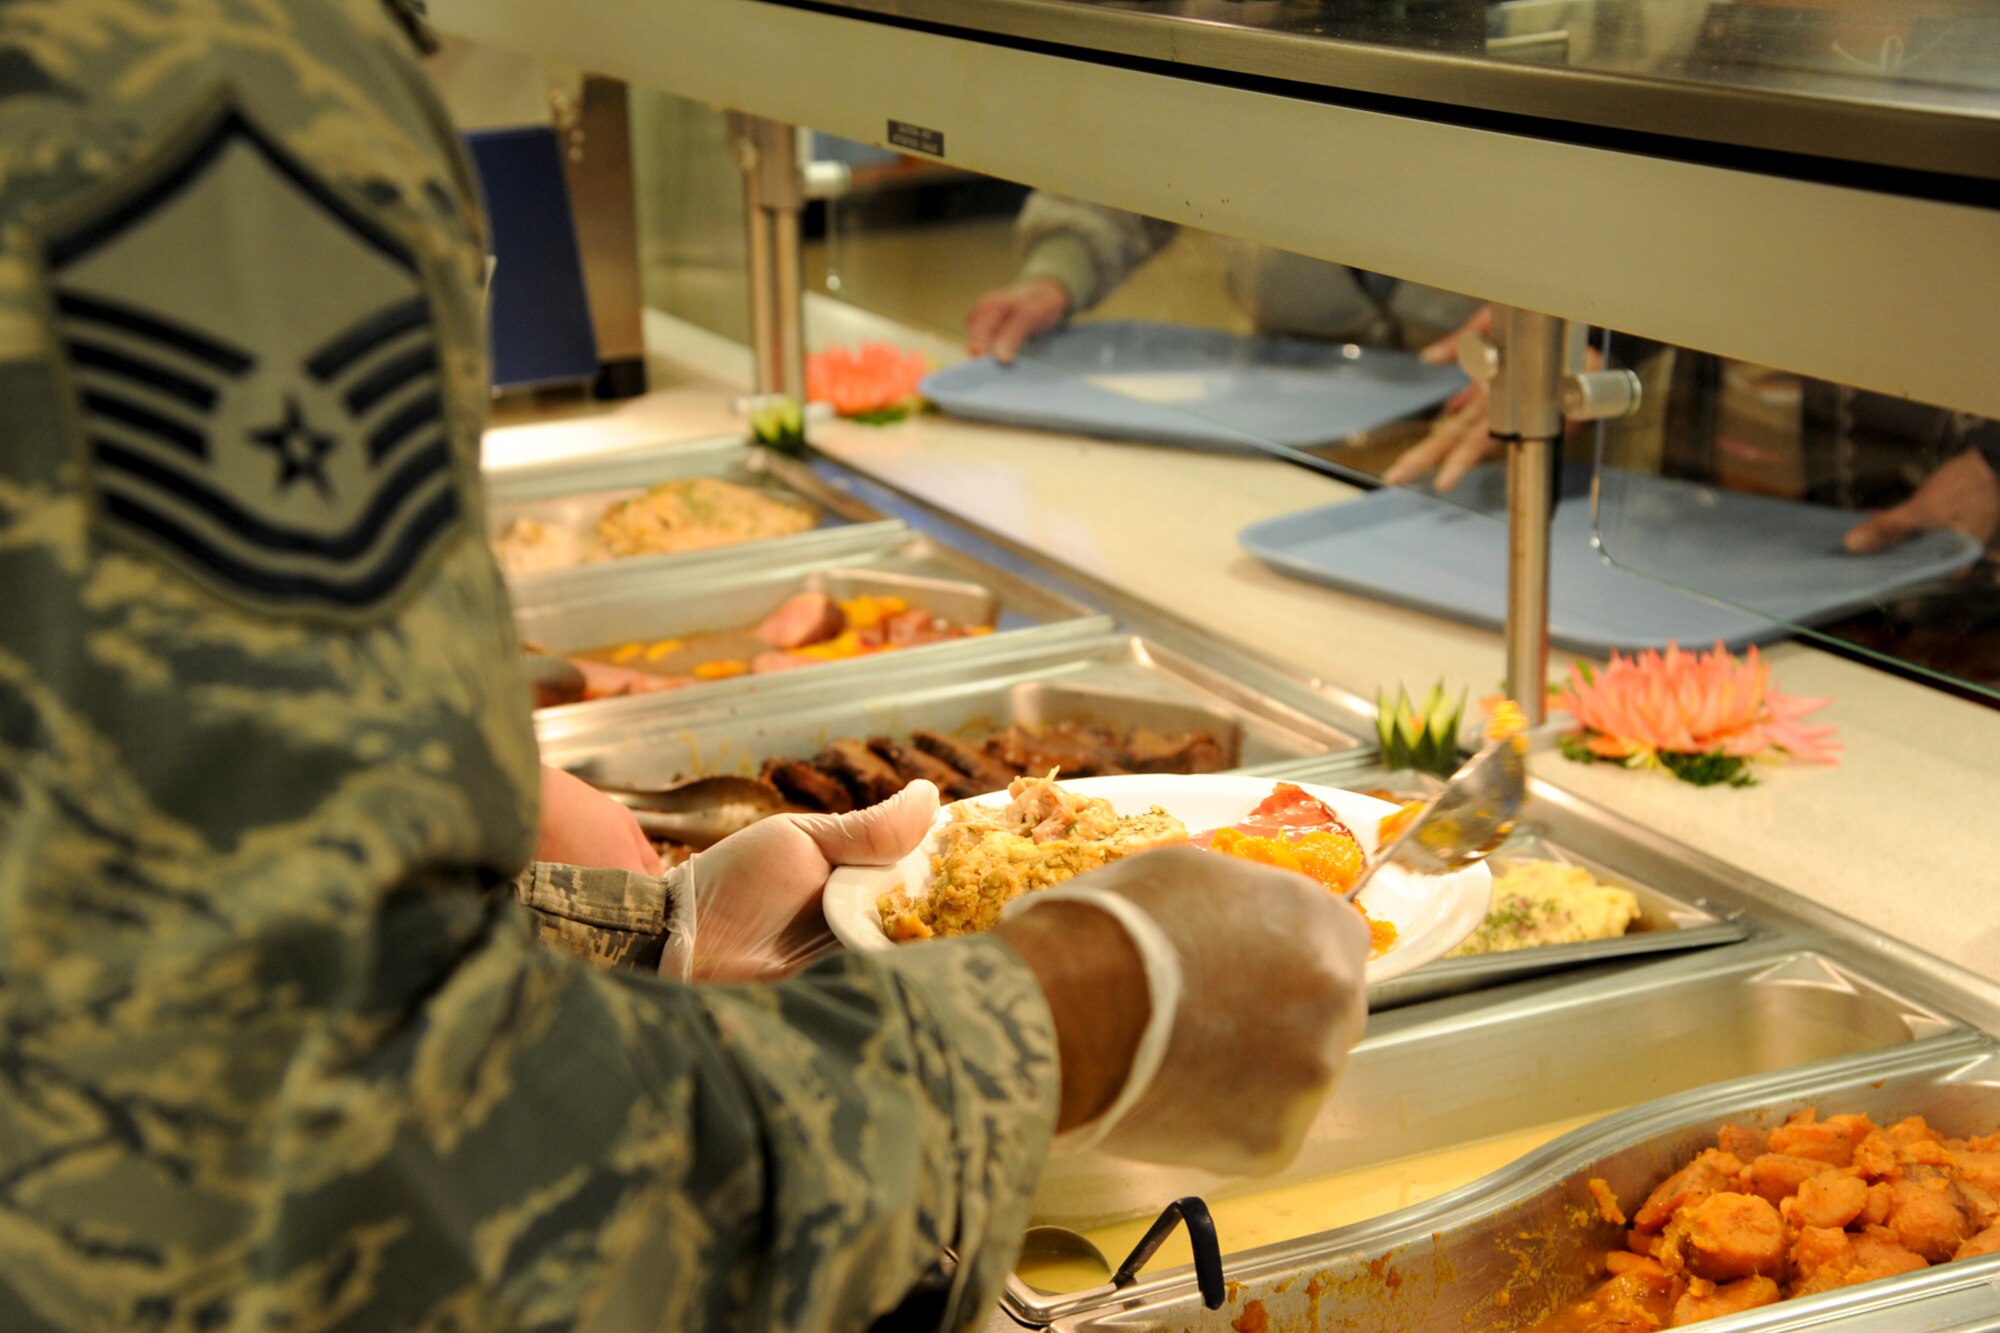 A Barksdale Airman prepares a plate during the Red River Dining Facility Thanksgiving lunch on Barksdale Air Force Base, La., Nov. 27, 2014. The traditional meal included turkey, ham, beef, a variety of sides and dessert. (U.S. Air Force photo/ Senior Airman Jannelle Dickey)